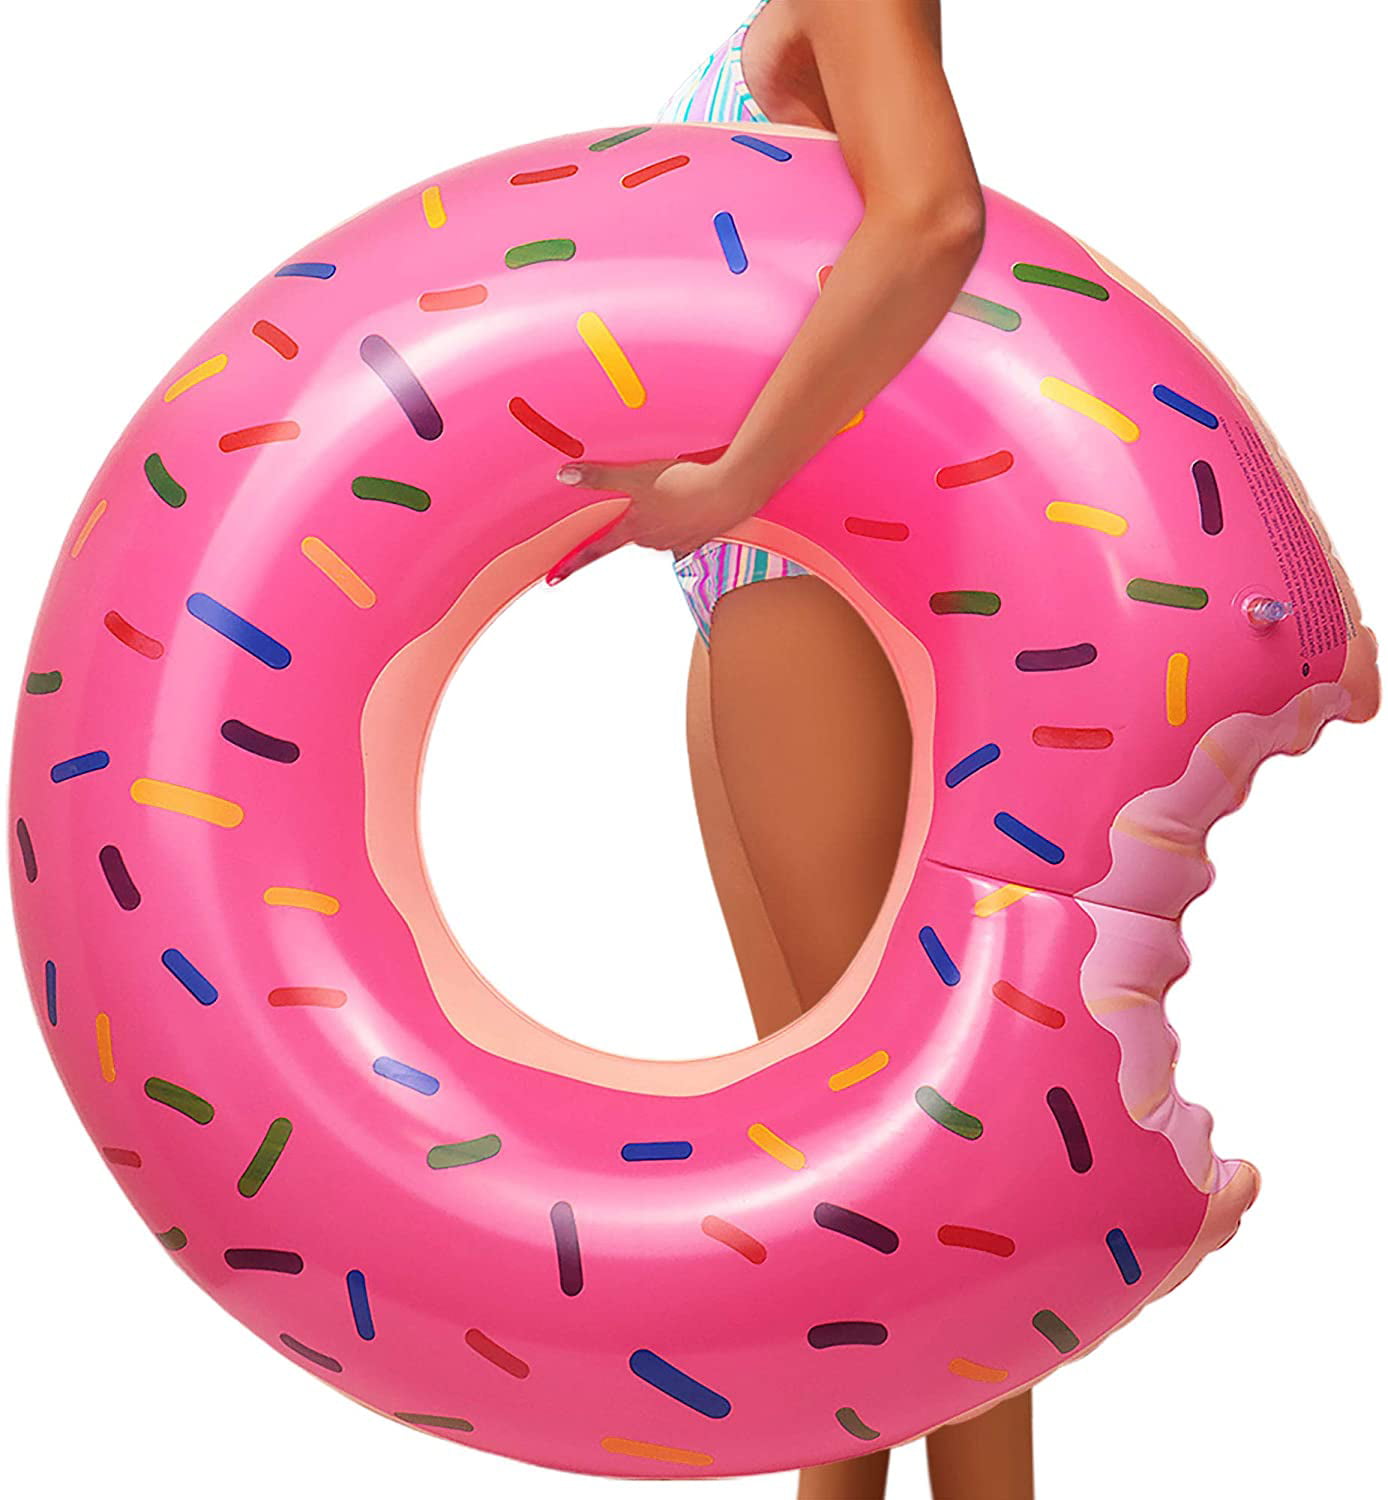 Inflatable Donut Swim Ring Tube Pool Float Lounger Beach Swimming Toy Lilo 